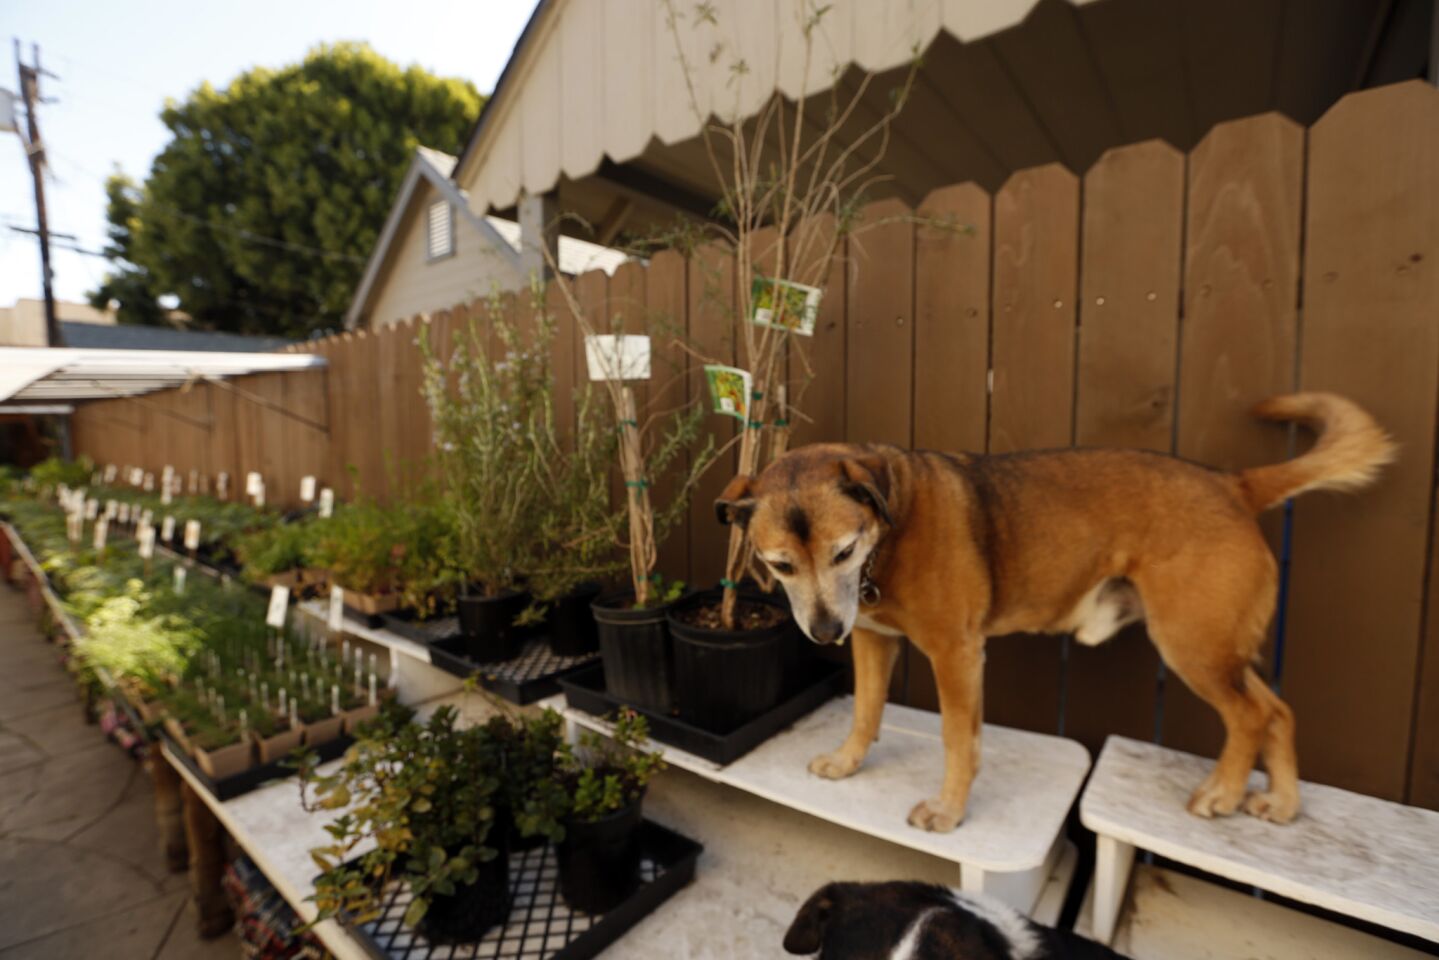 Lalo is ready to greet customers for the spring sale at the Two Dog Organic Nursery.